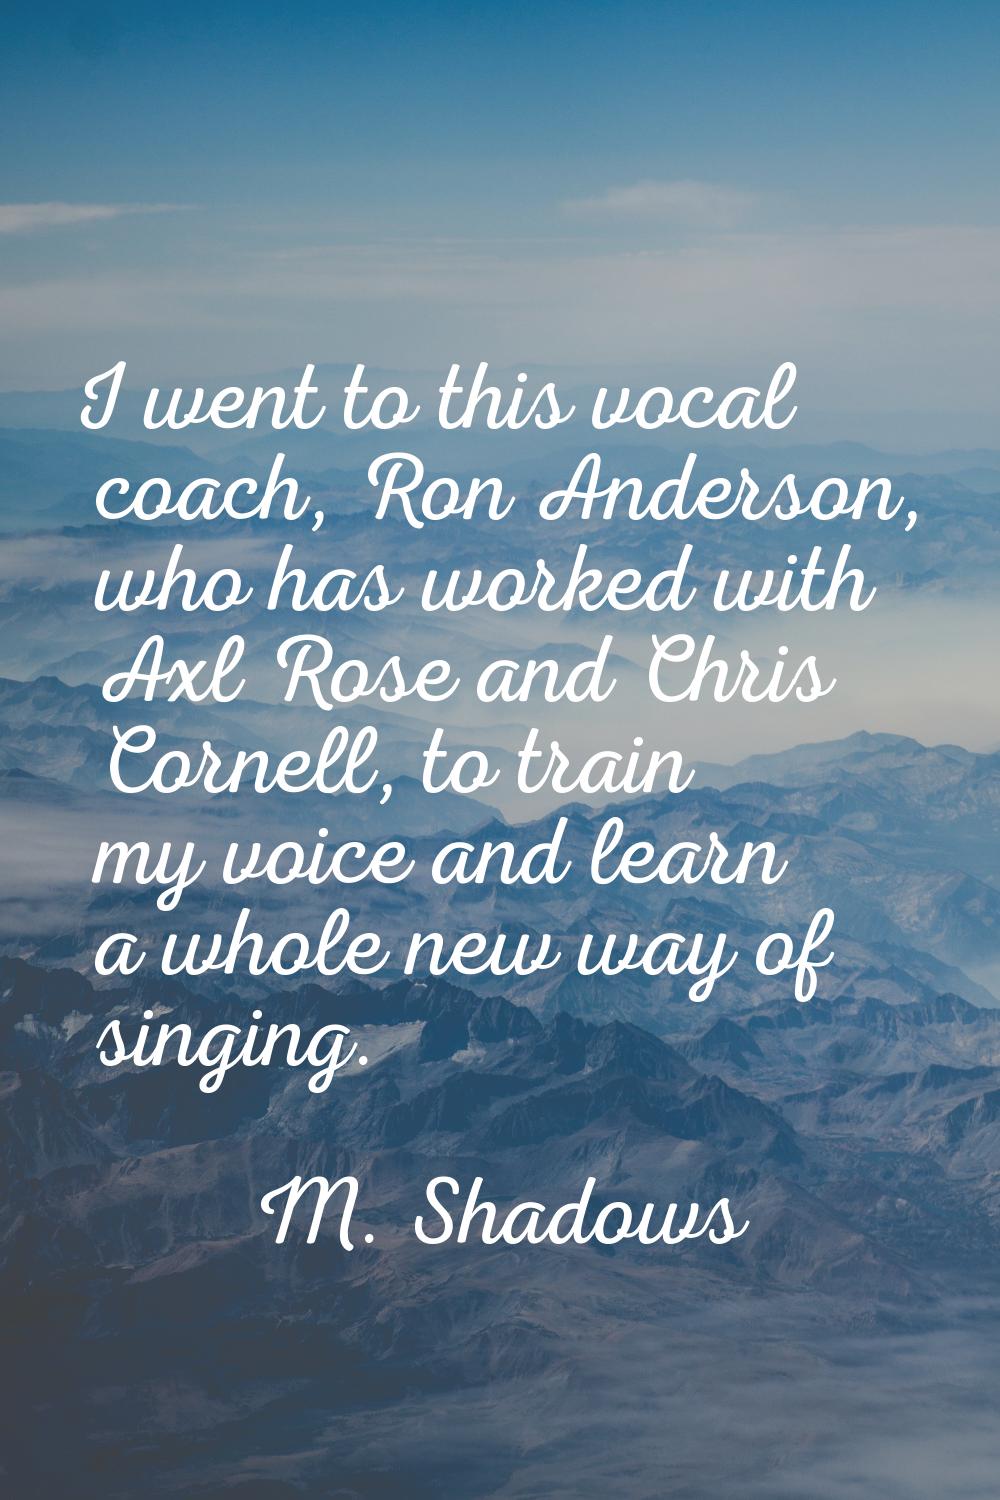 I went to this vocal coach, Ron Anderson, who has worked with Axl Rose and Chris Cornell, to train 